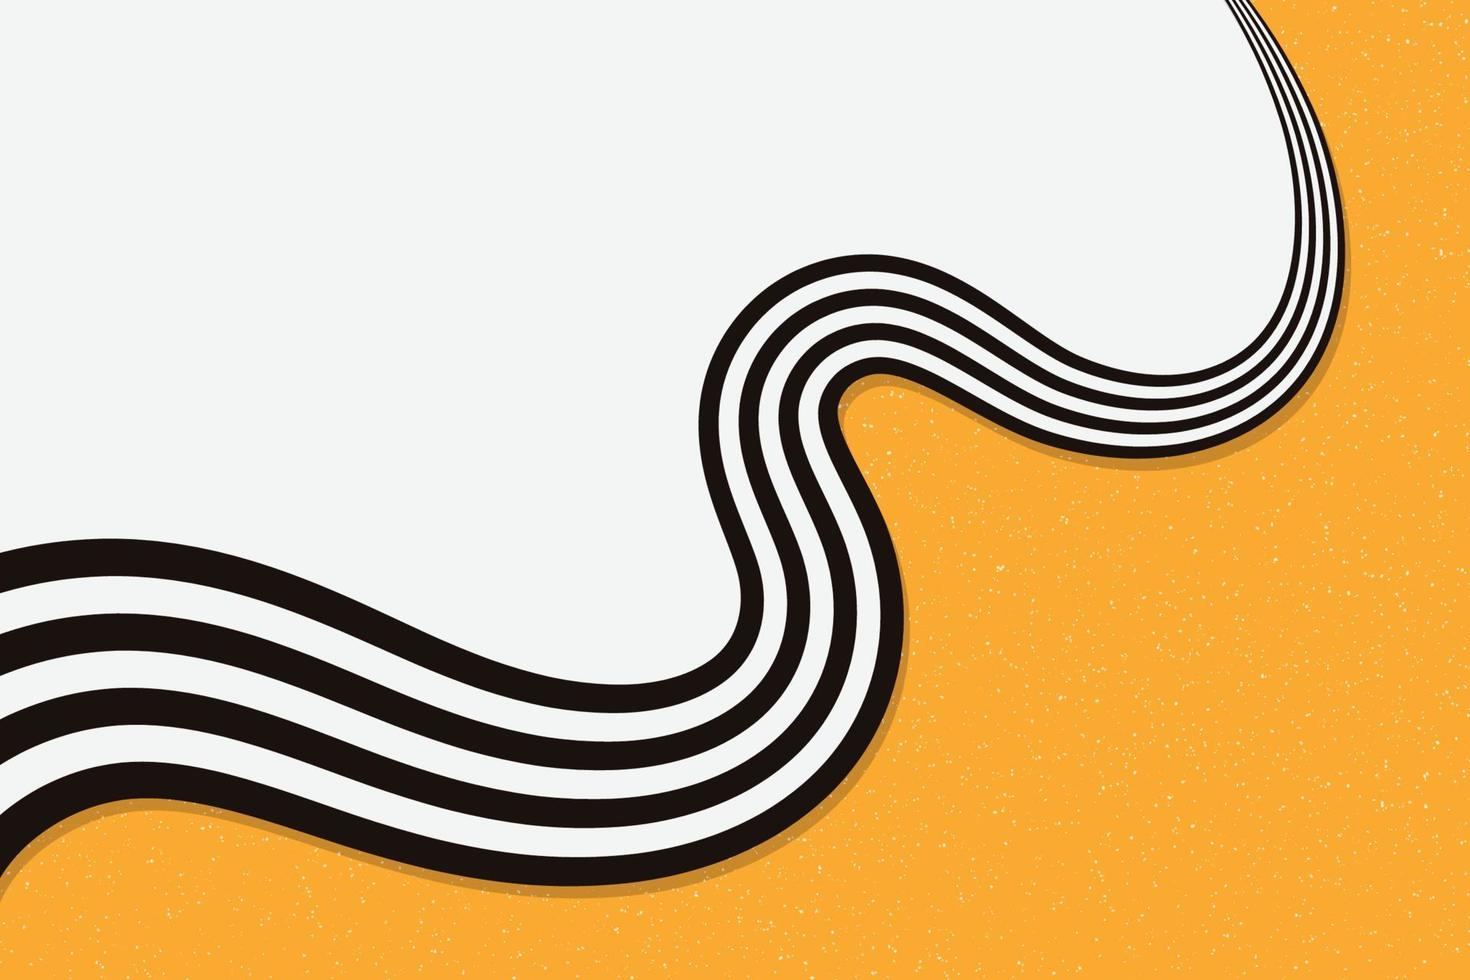 Abstract striped curve lines brake background on orange and white colors in retro and vintage style vector